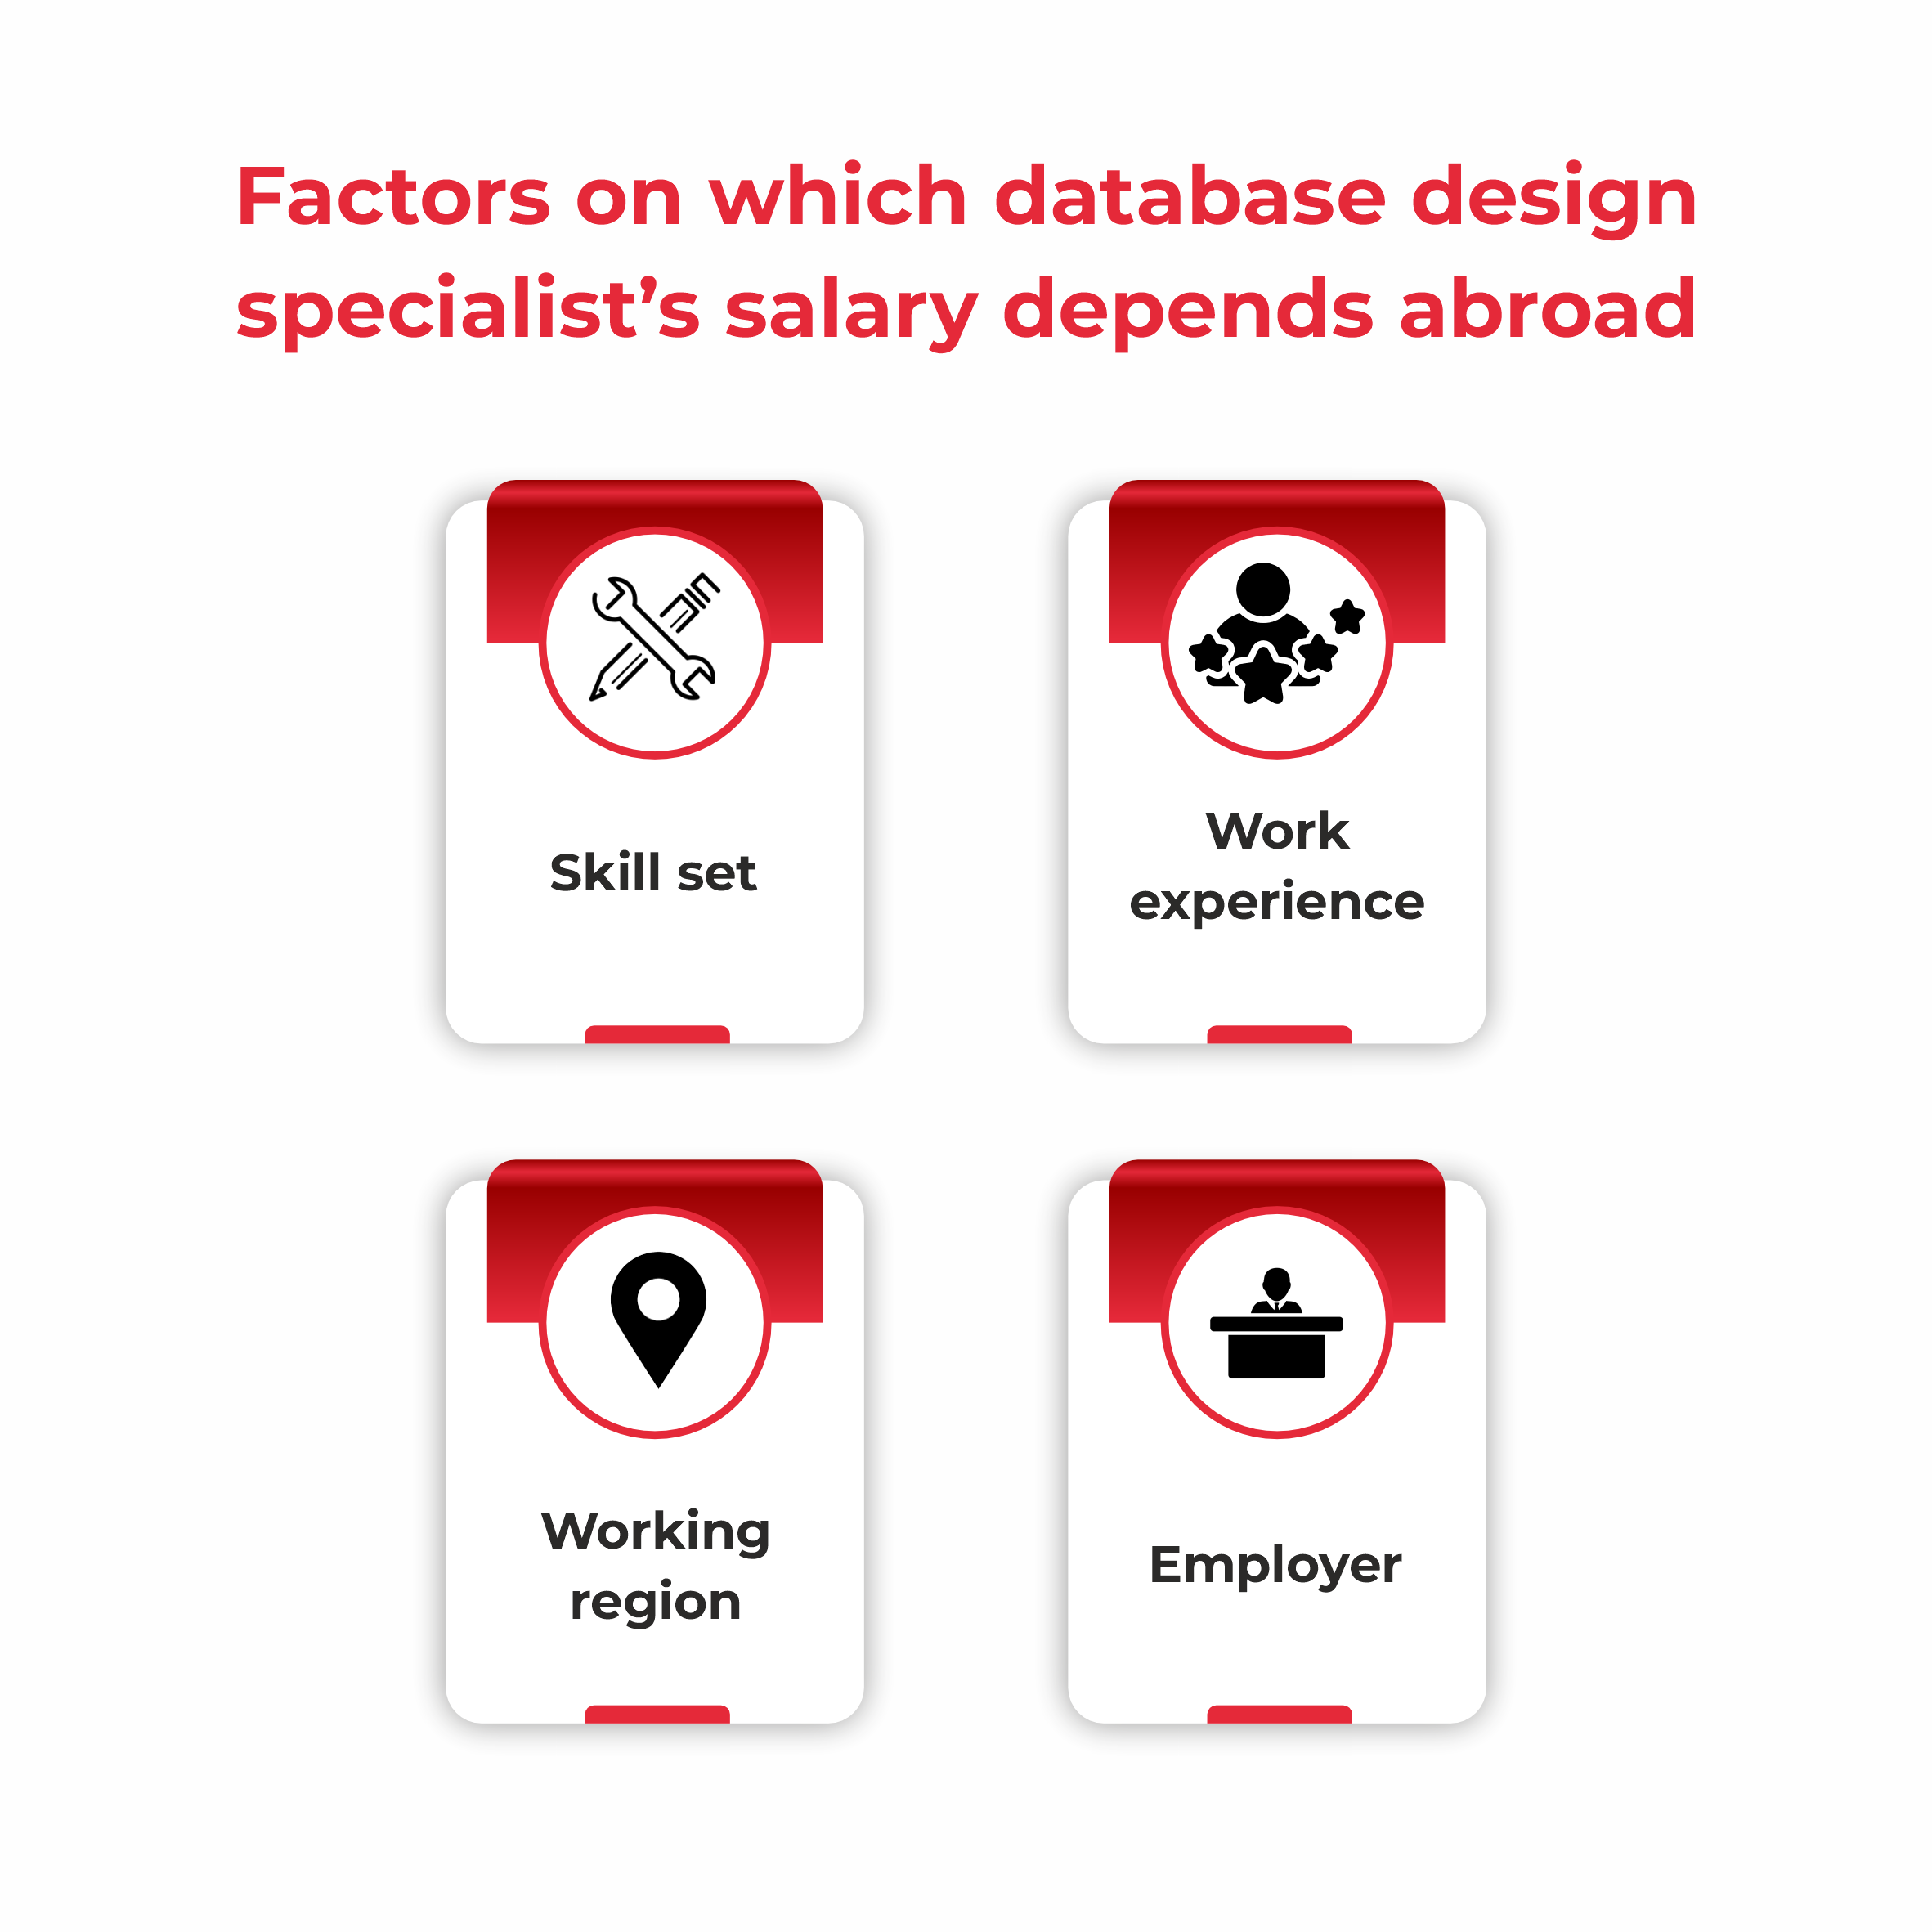 database design specialist’s salary abroad